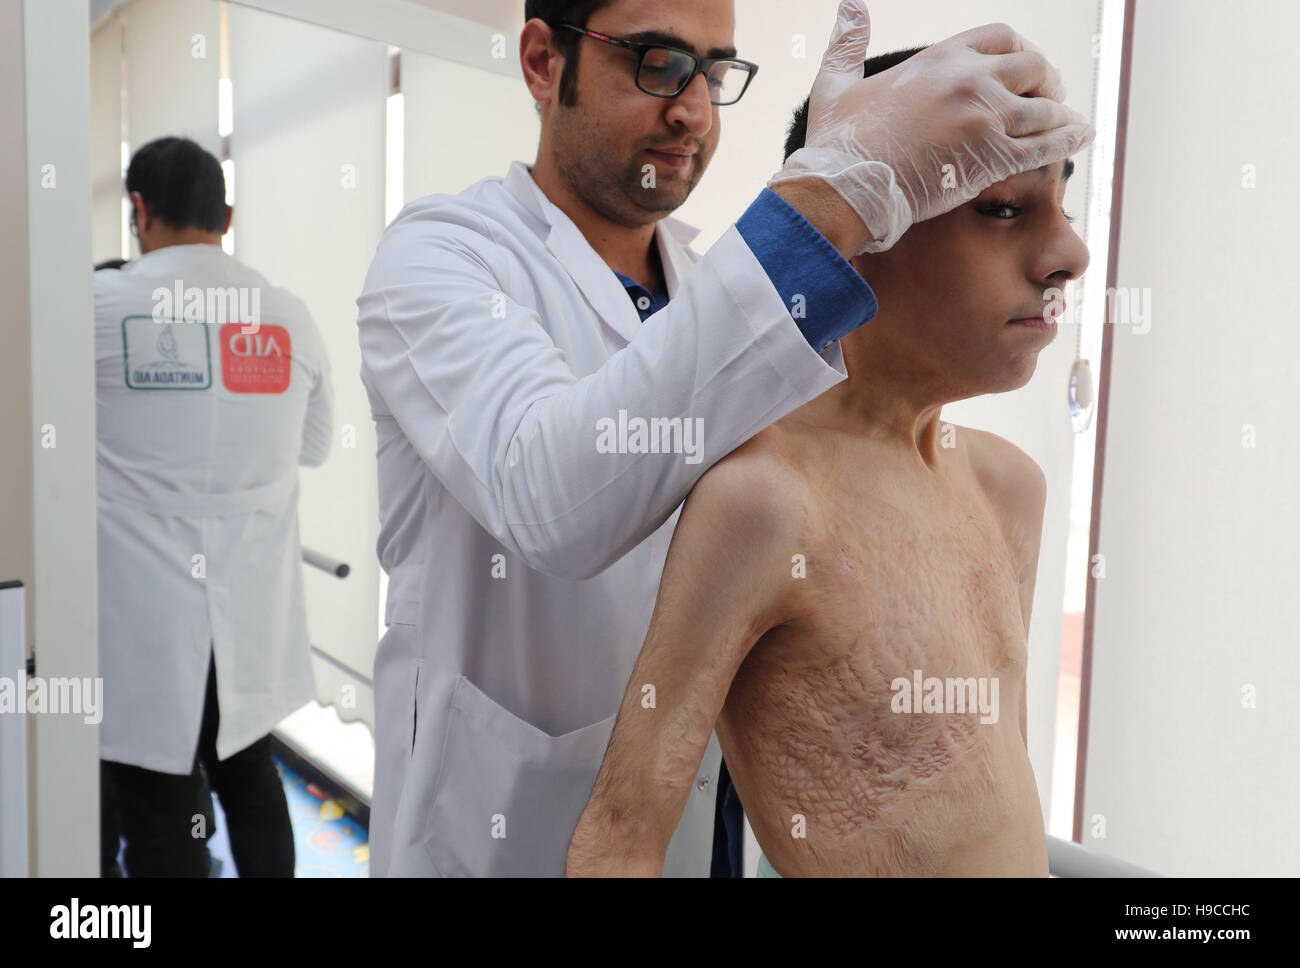 Syrian refugee Ahmad El Alayi, 12, undergoing treatment at a physical rehabilitation centre in Sanliurfa, south eastern Turkey, run by the UK-based charity Muntada Aid in partnership with AID Turkey. Ahmad fled Syria after his home was bombed two years ago, killing the whole family except for him and his grandfather. Ahmad was badly burnt in the bombing and lost most of his cognitive abilities. He is now unable to speak or control his body, and suffers from post-traumatic stress disorder (PTSD). Stock Photo